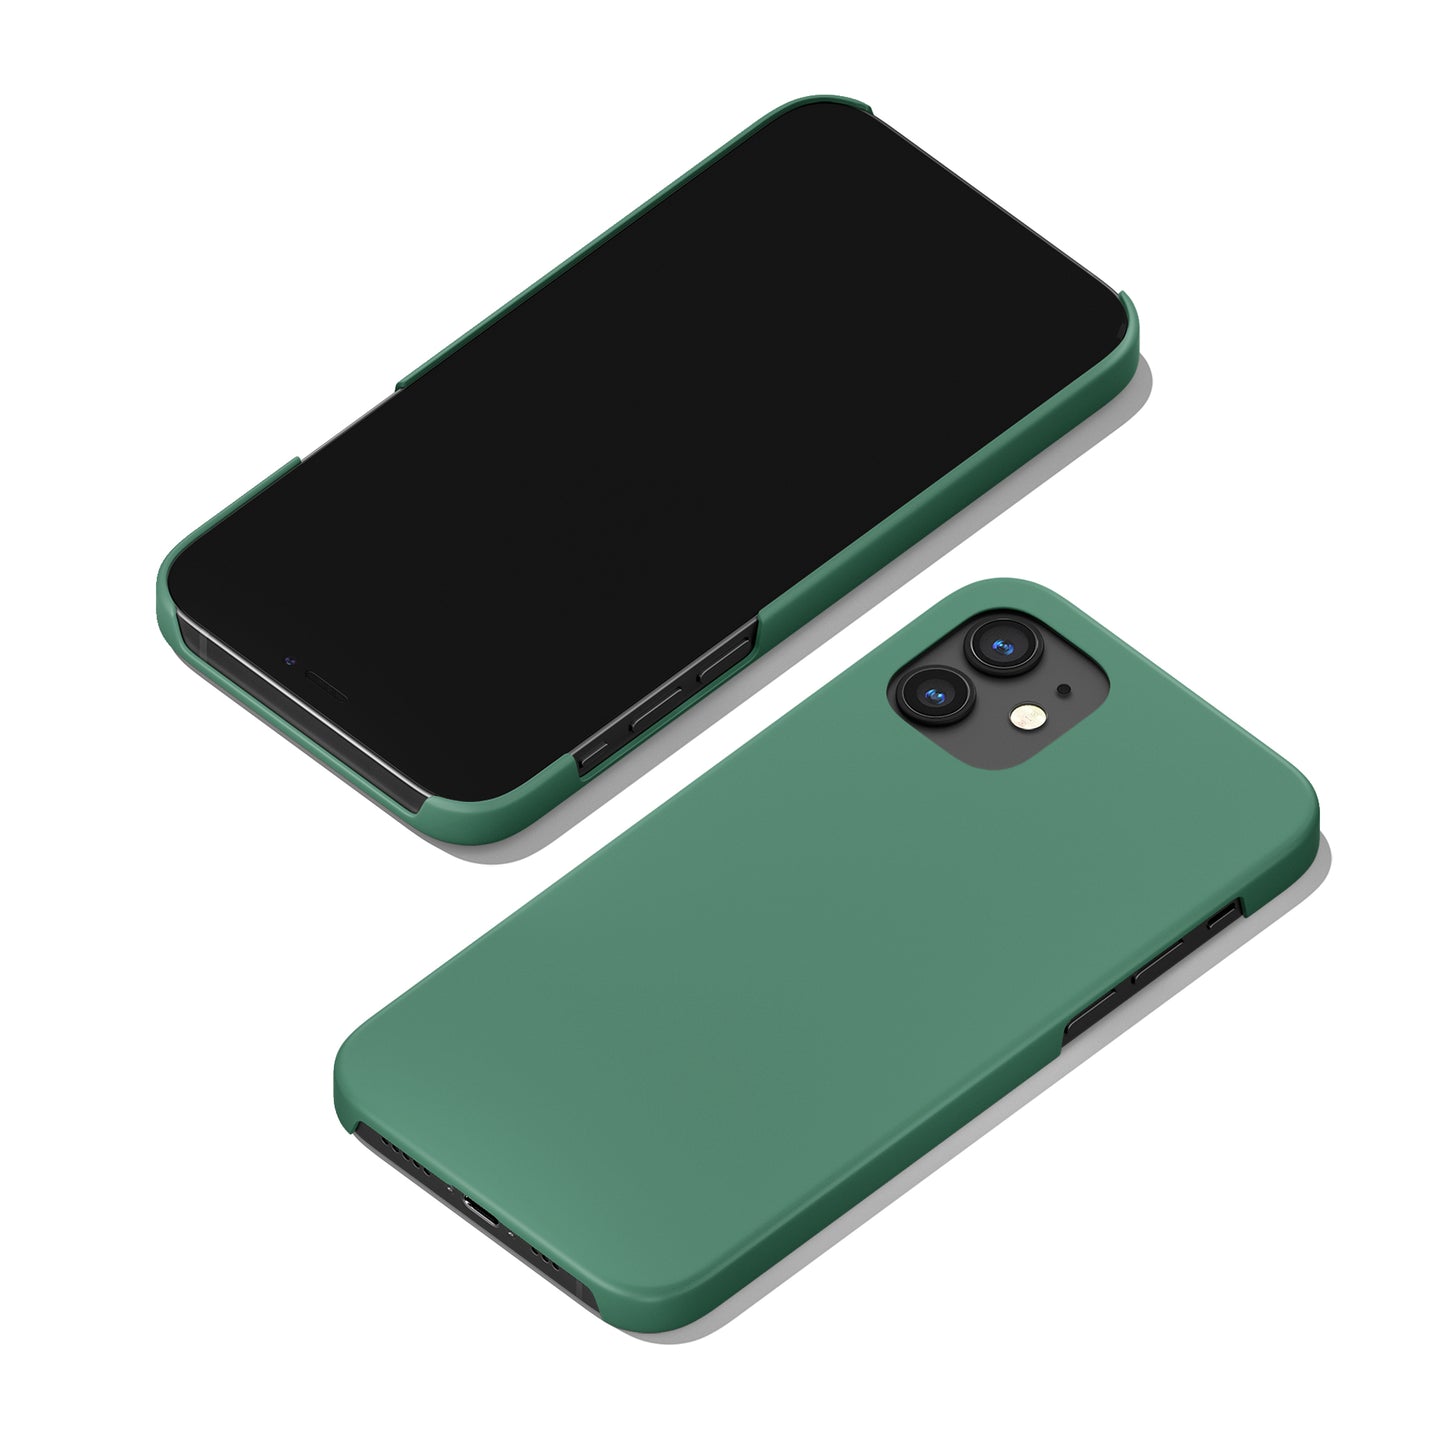 Green iPhone Case